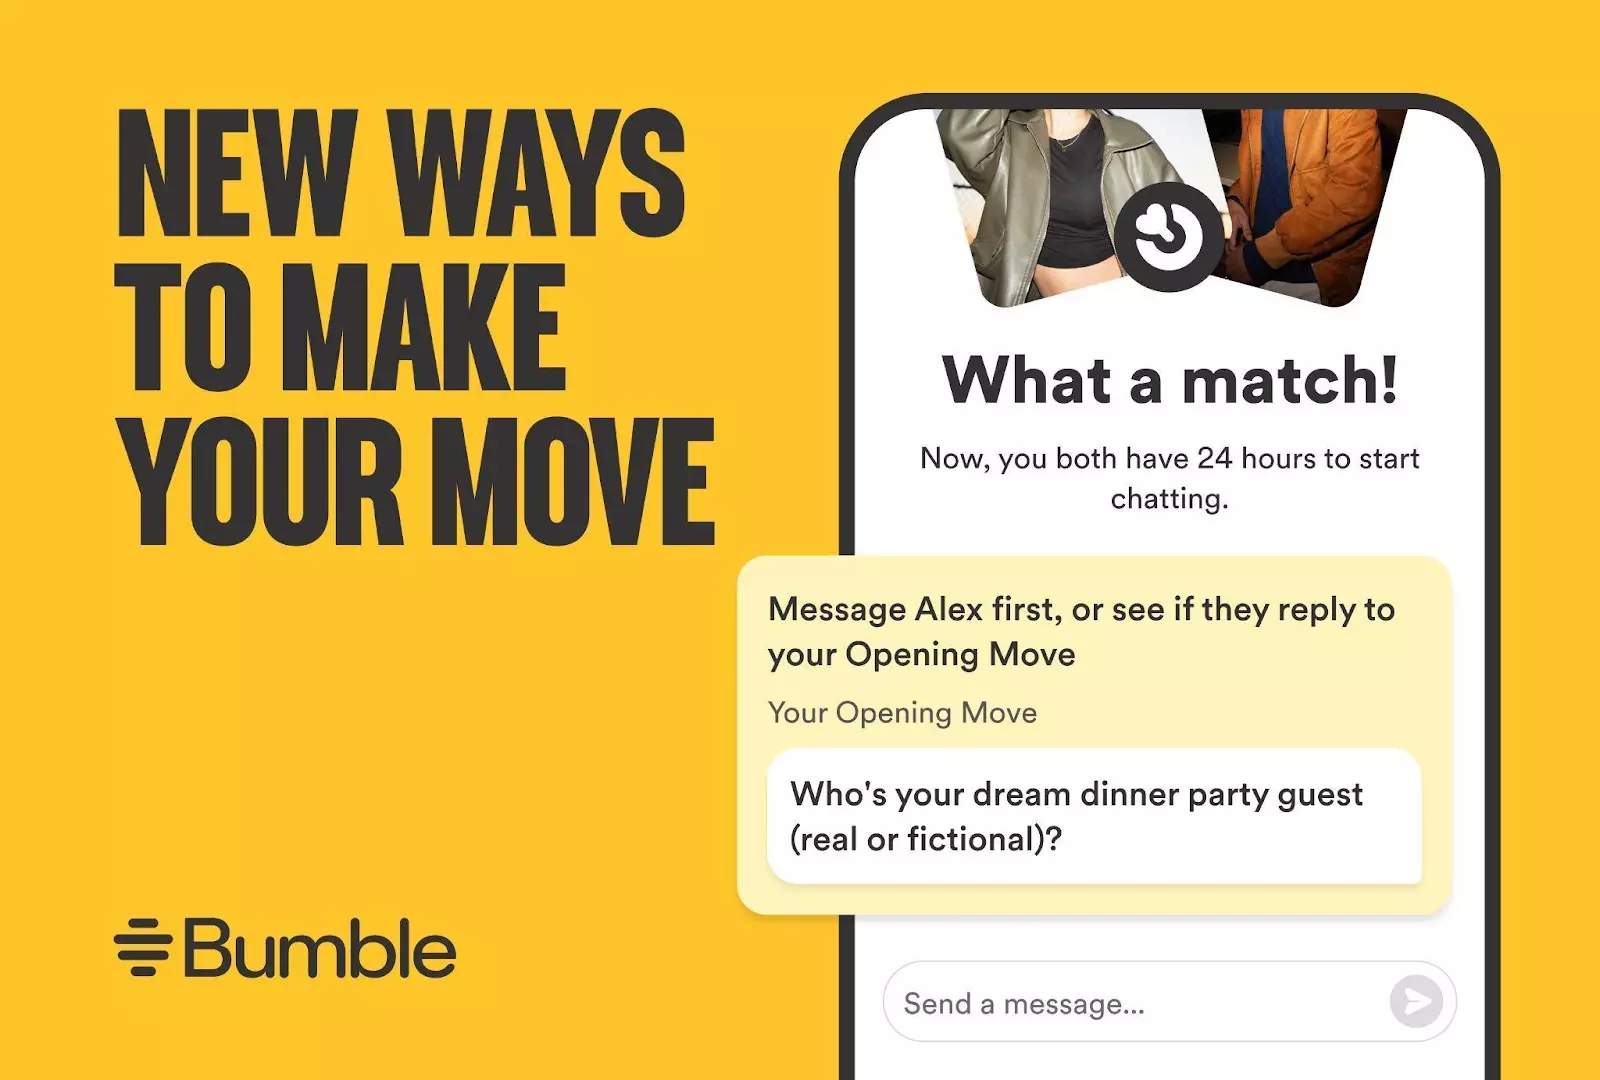 Bumble gives women more choice to make the first movie